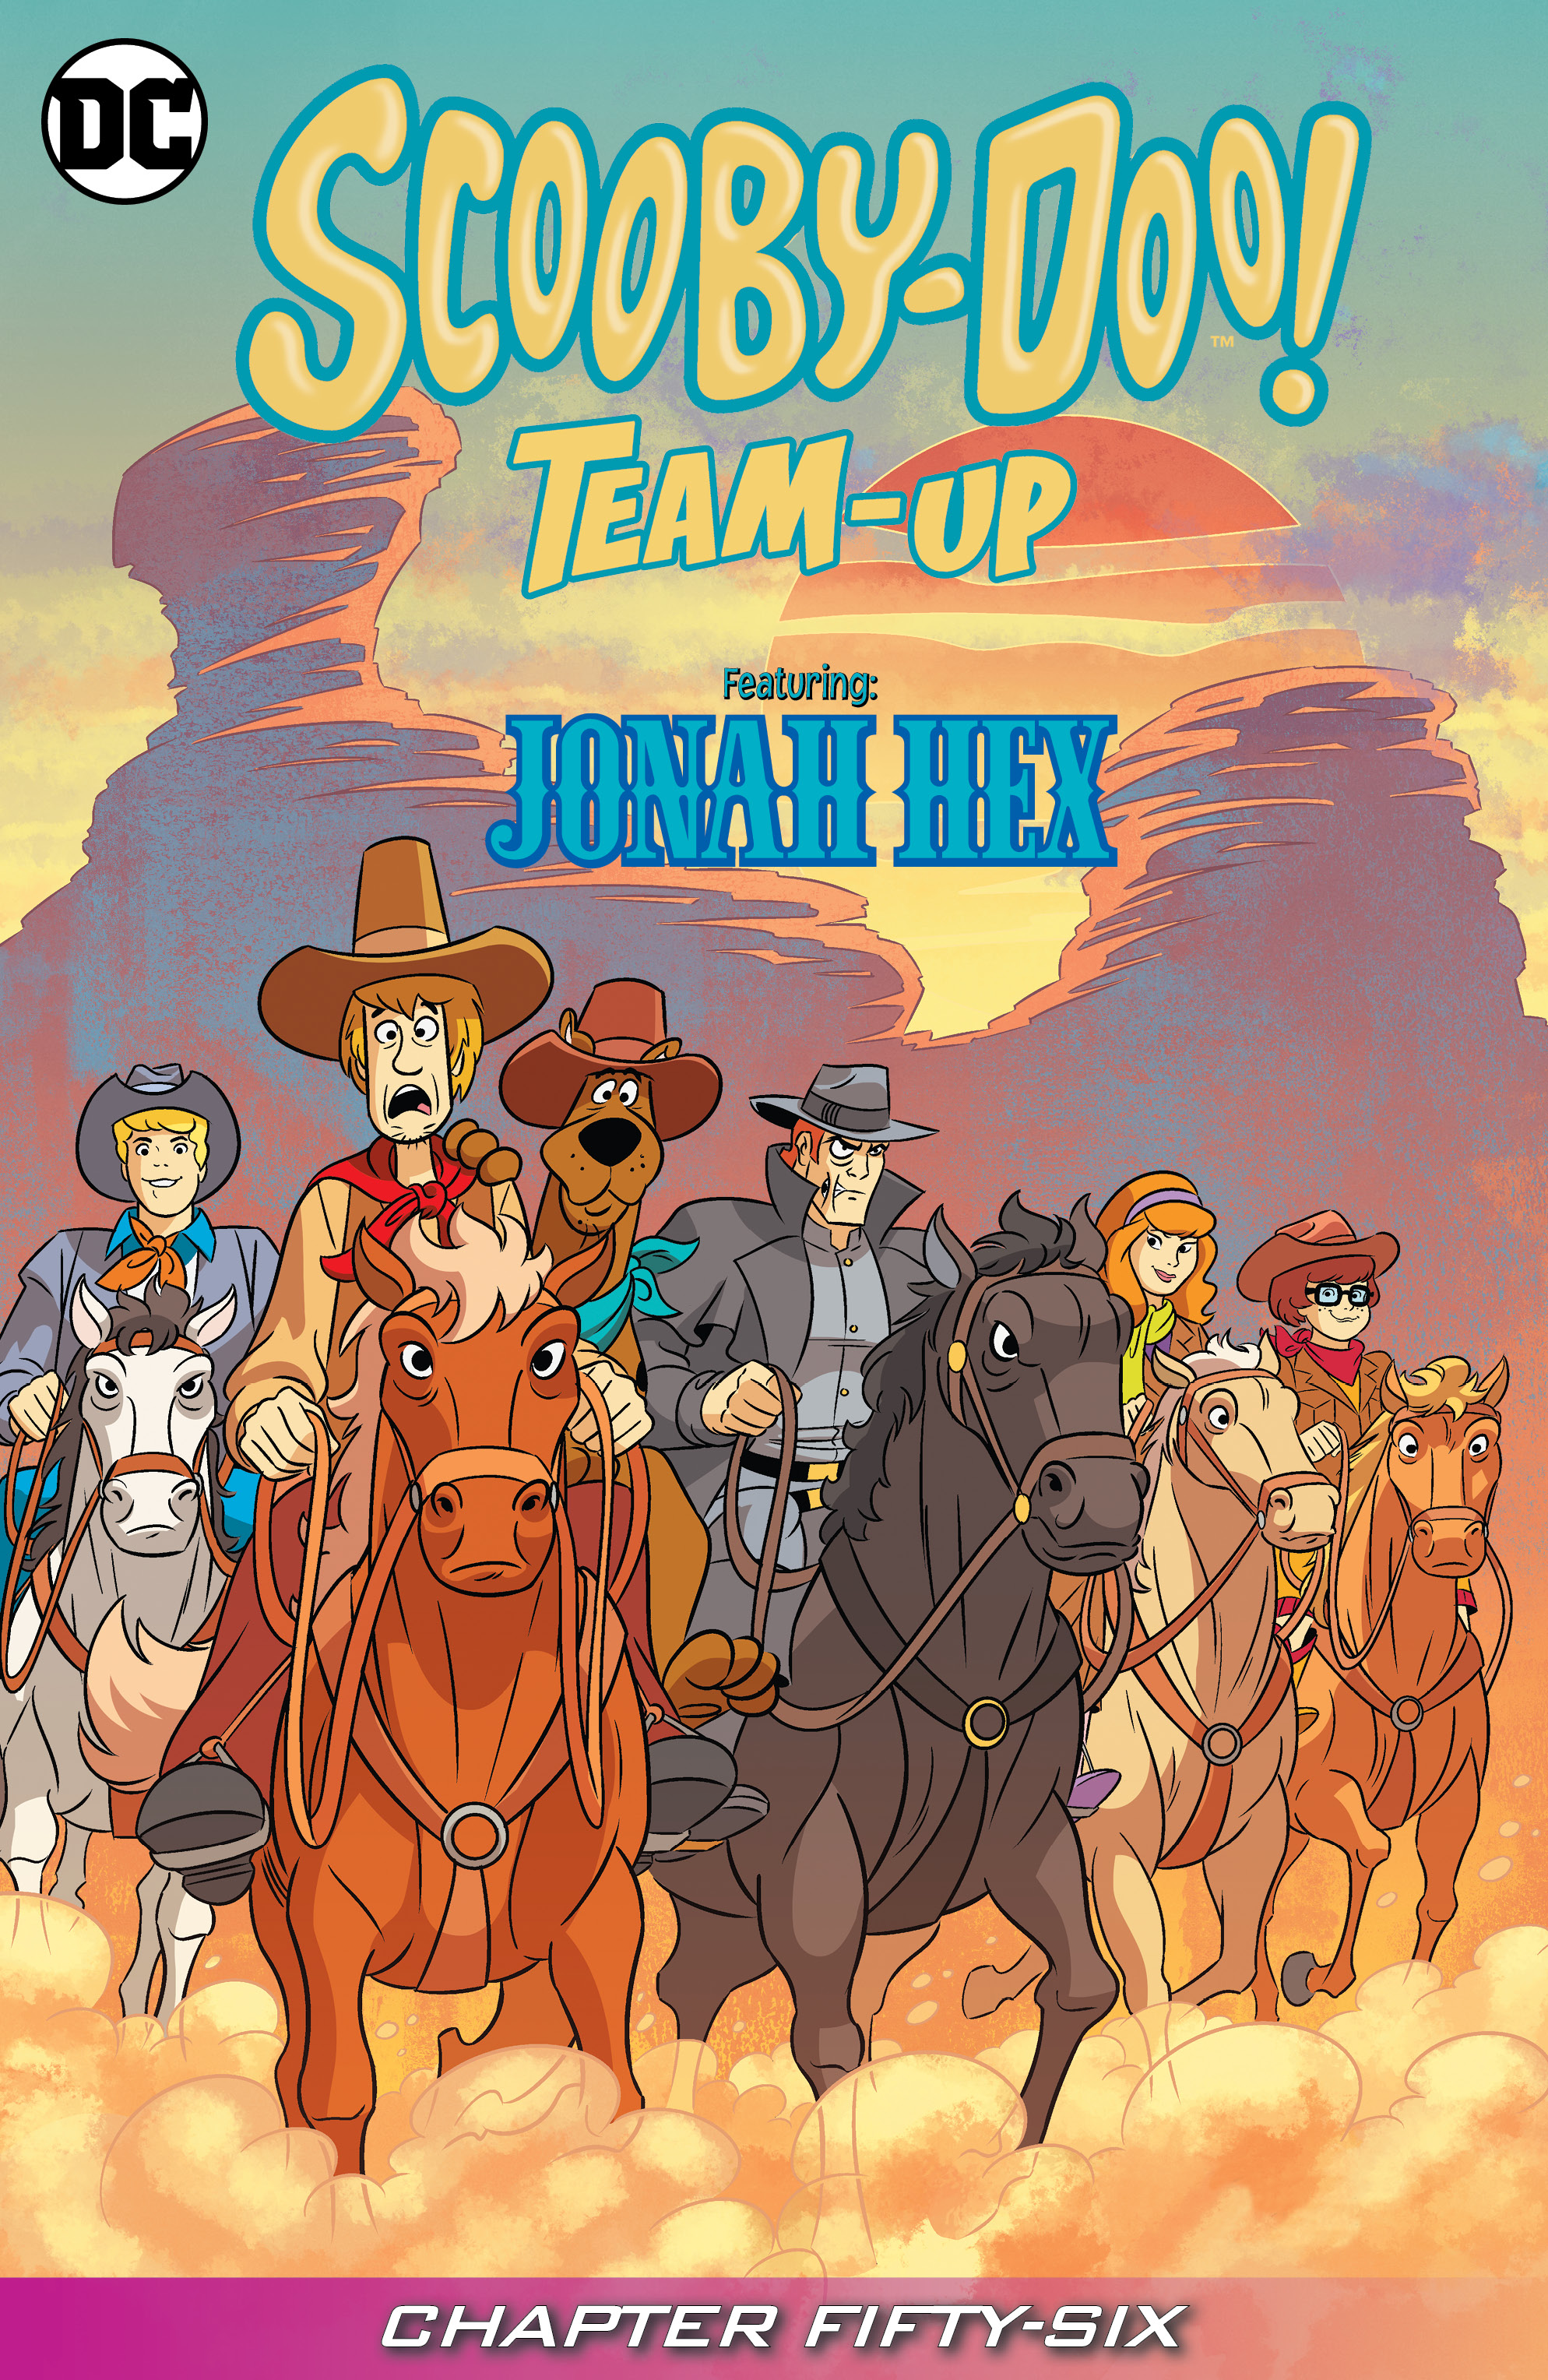 Scooby-Doo Team-Up #56 preview images